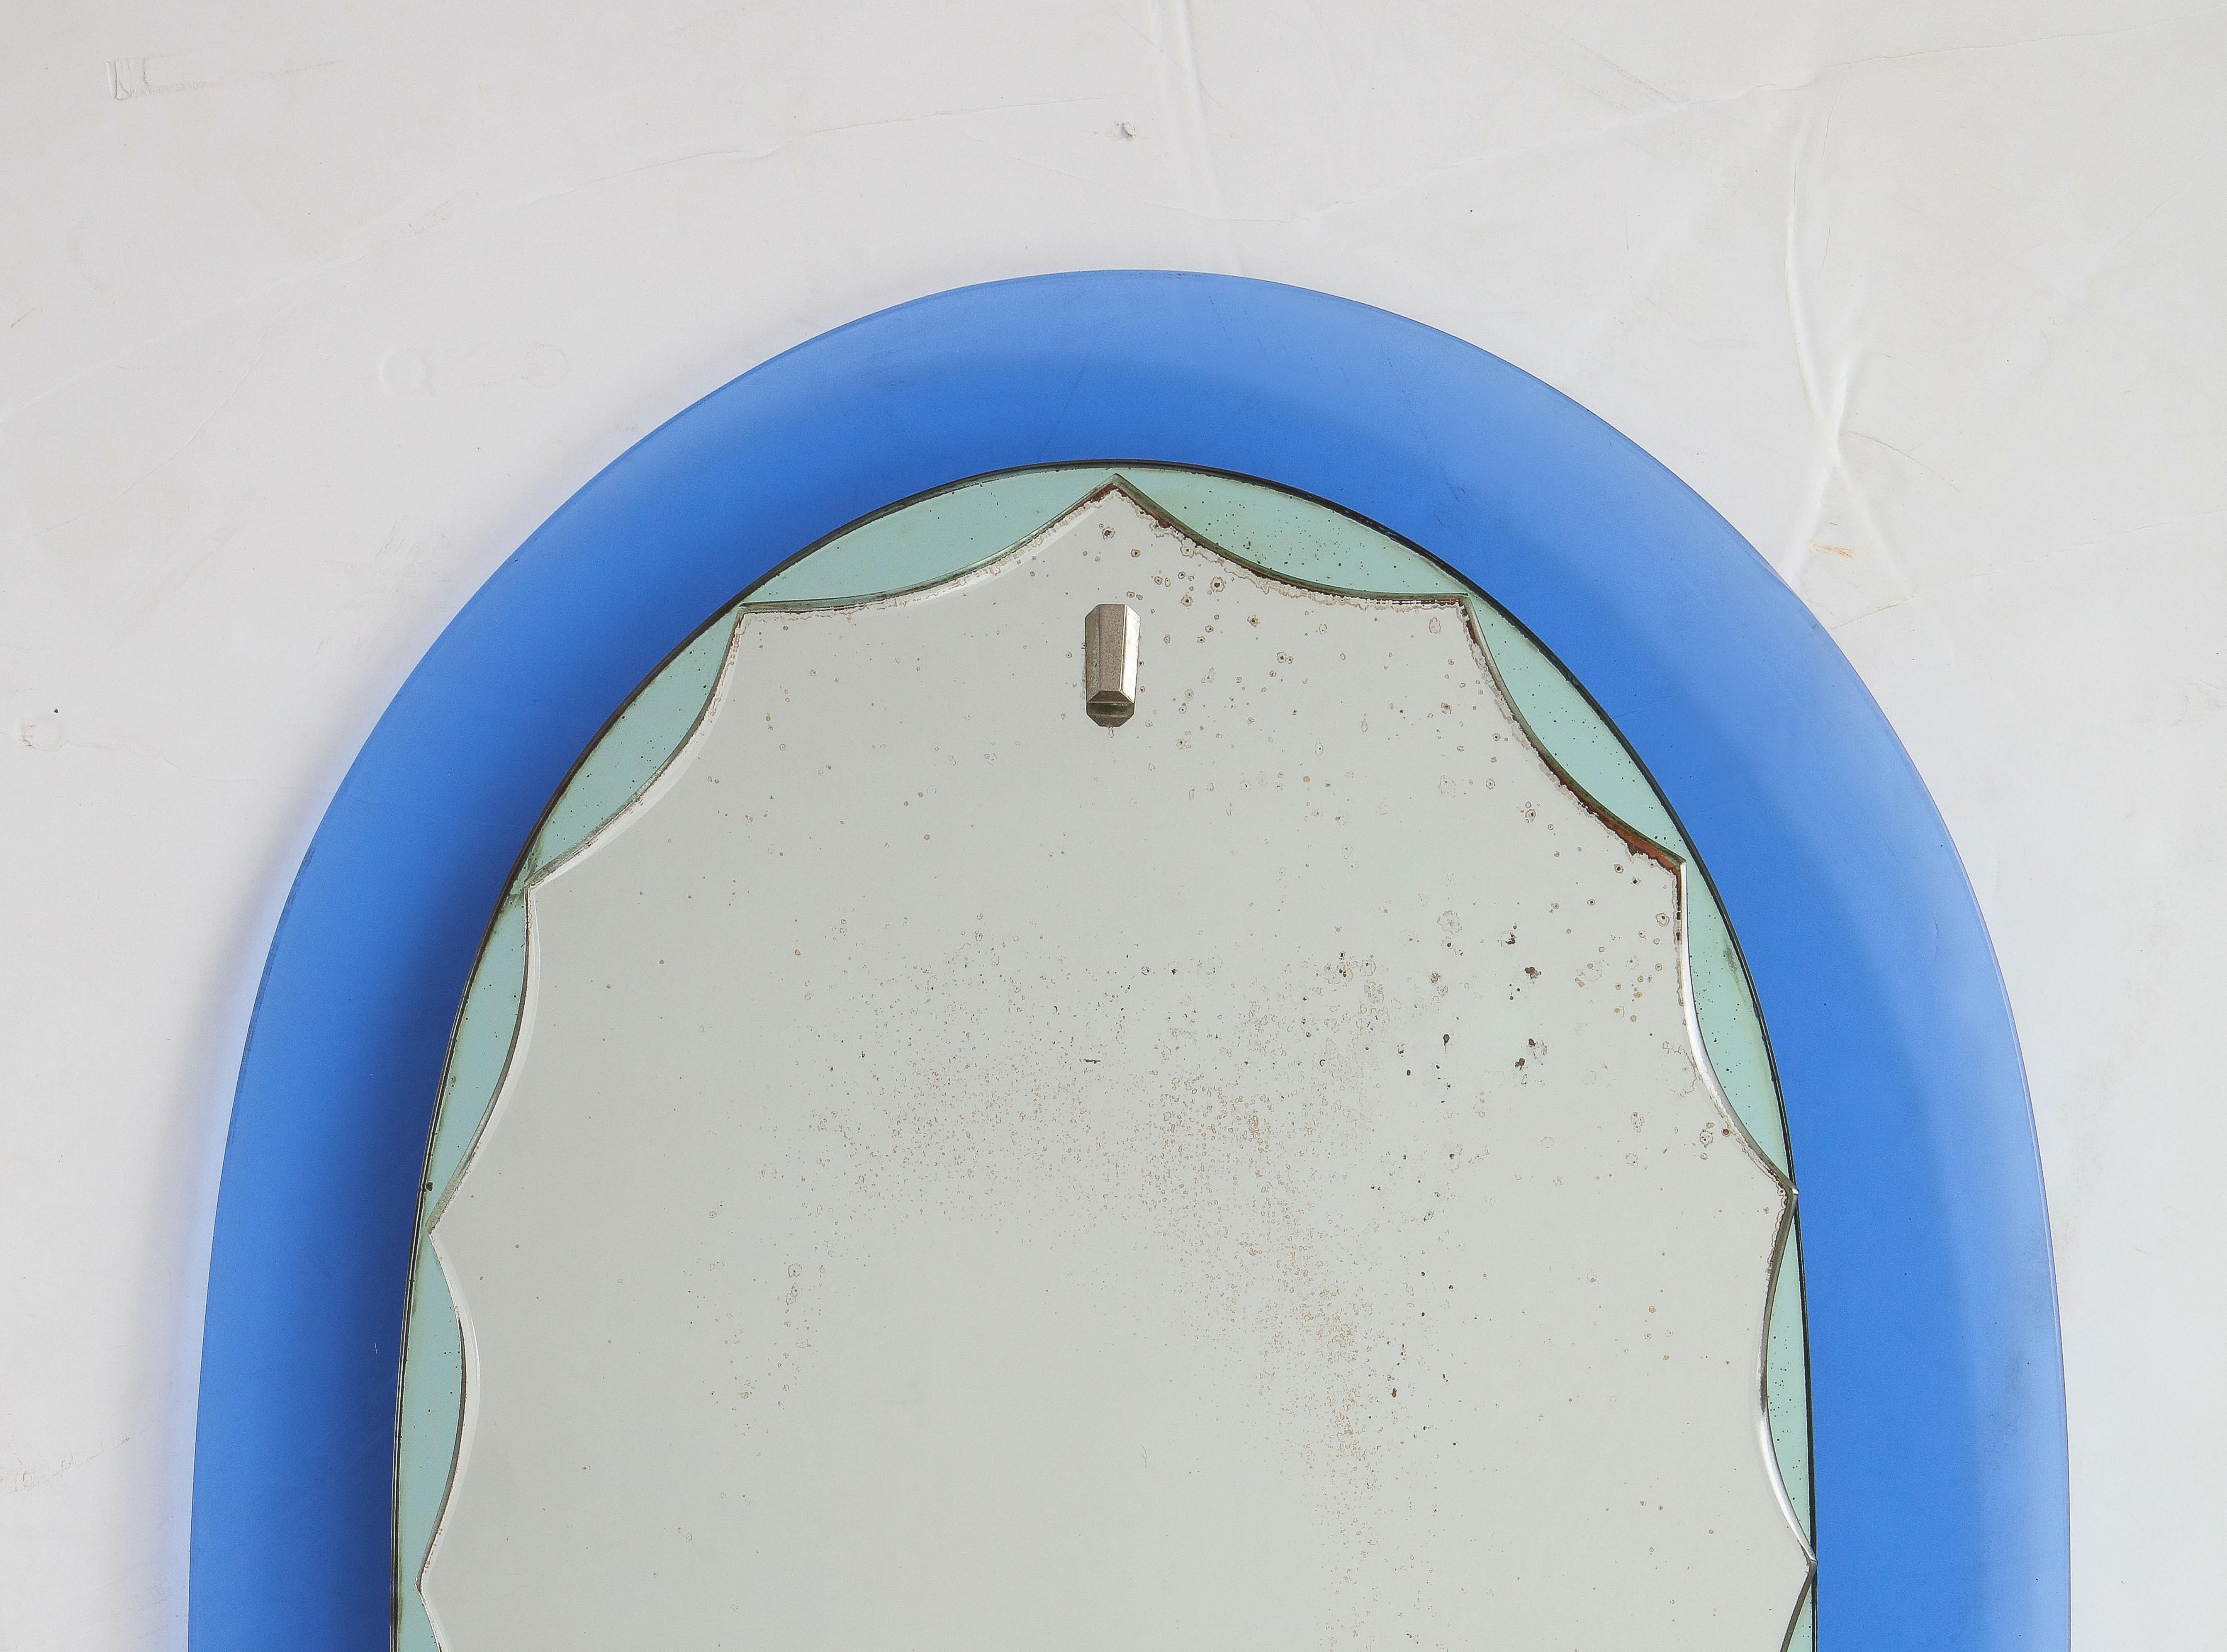 Stunning 1950's Mid-Century Modern blue frame with scalloped green mirror detail and brass hardware Italian mirror, in vintage original condition with some wear and patina due to age and use.